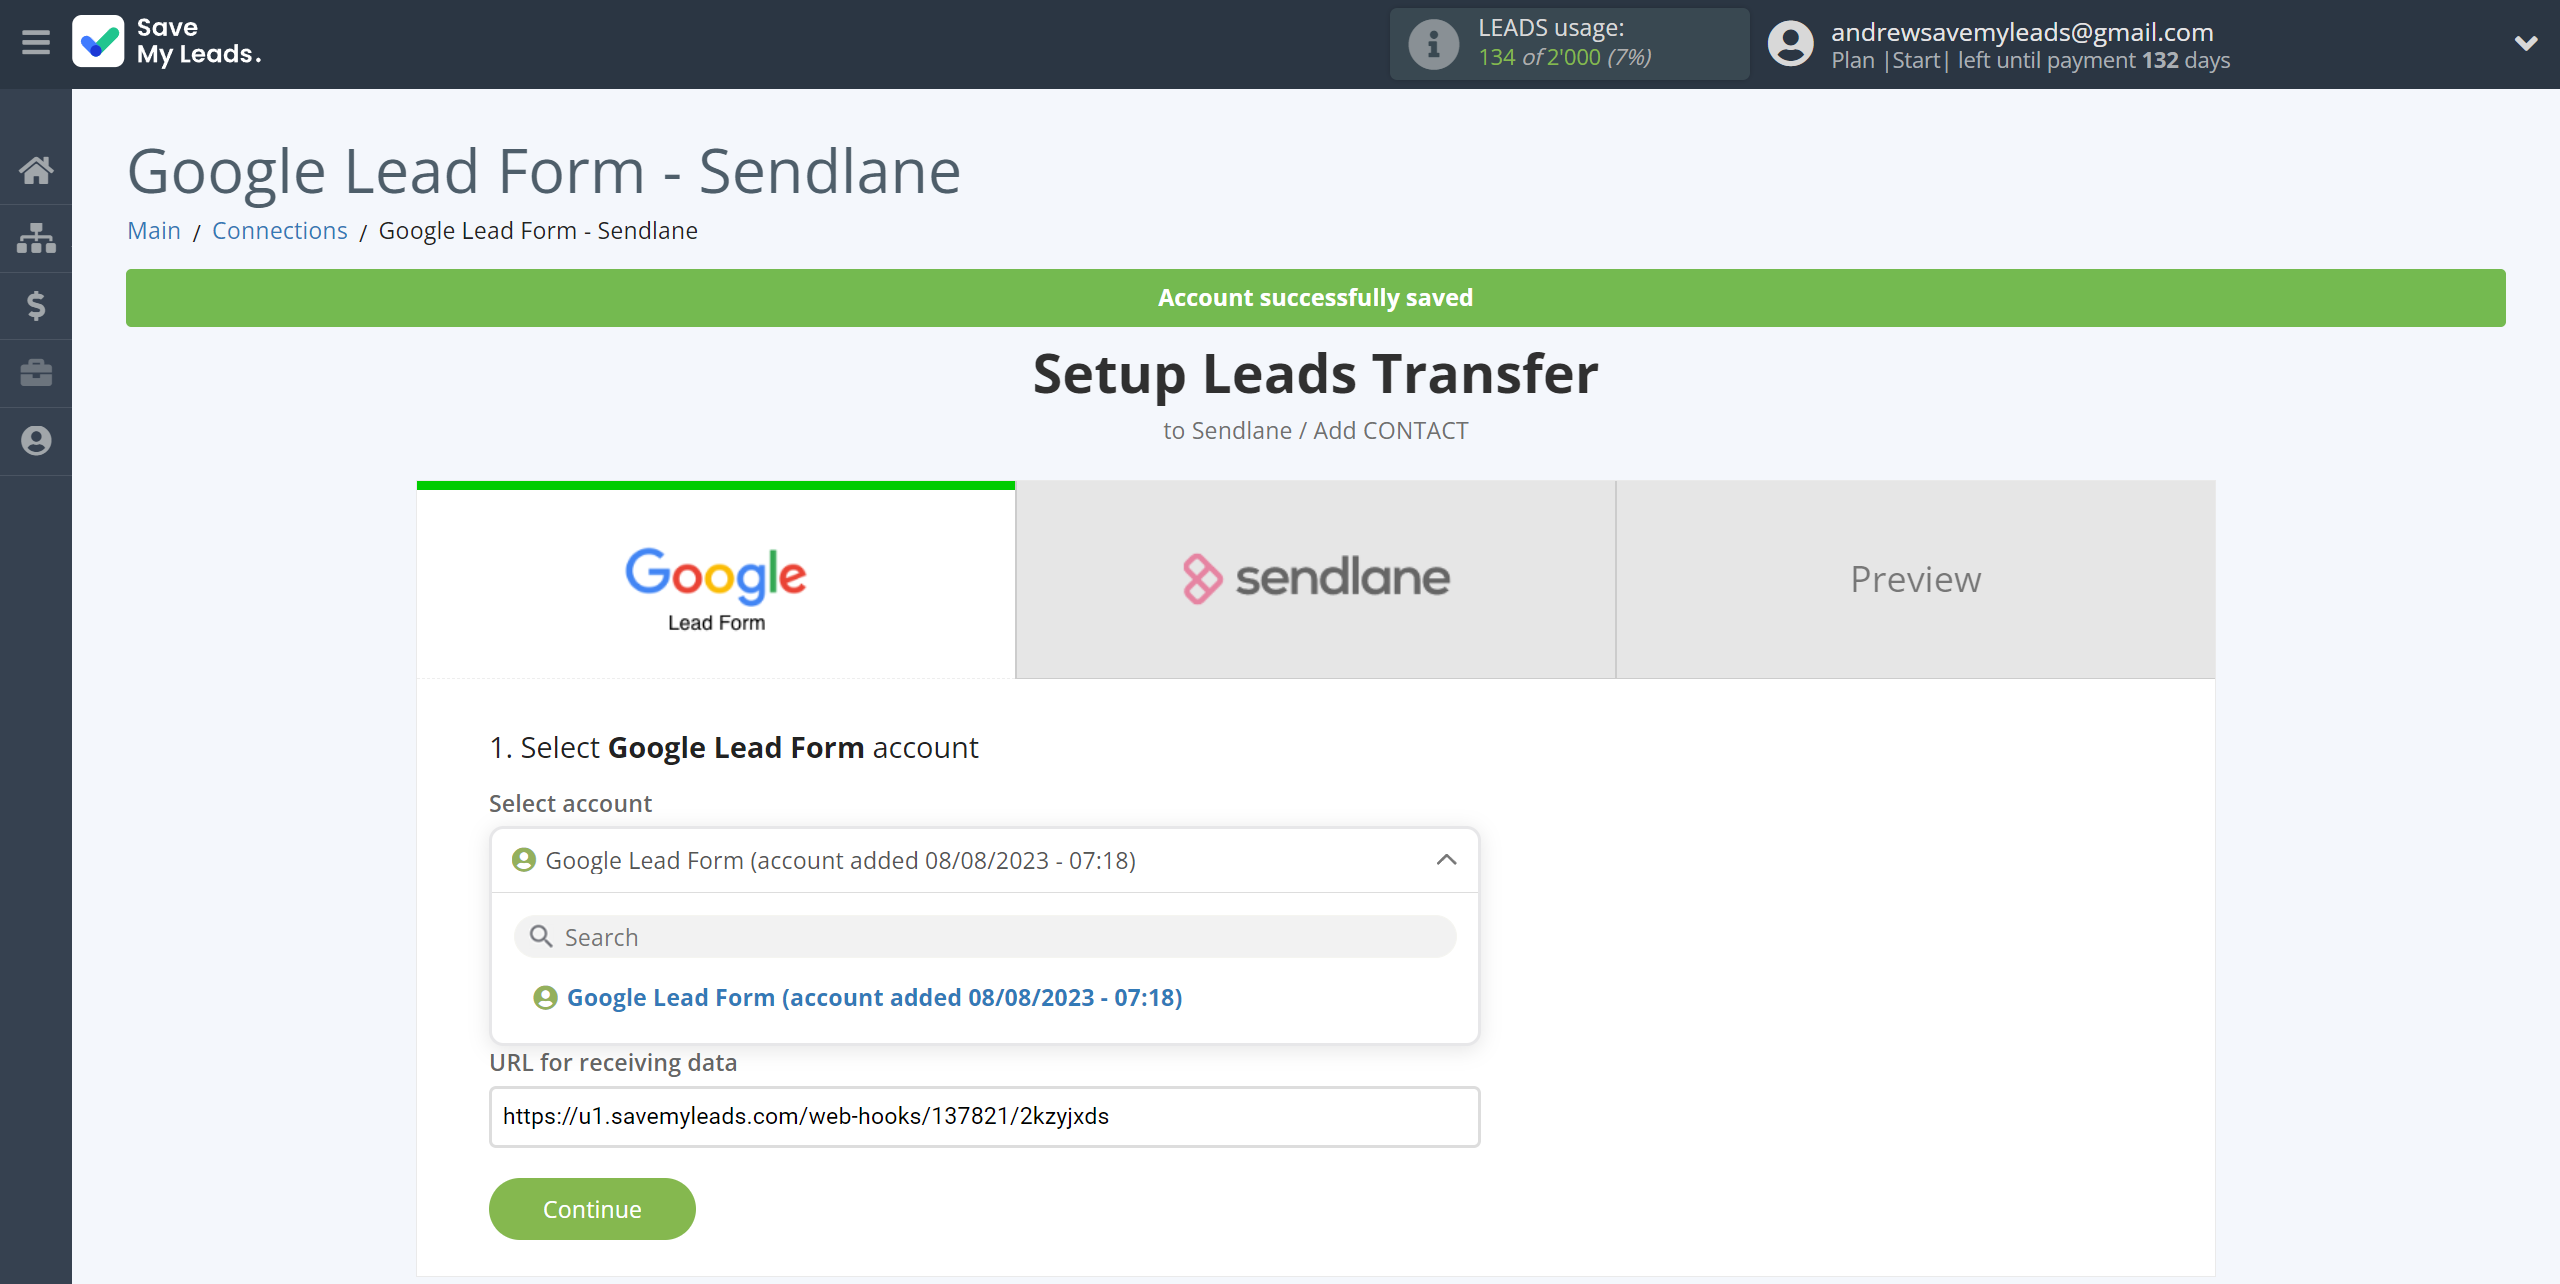 How to Connect Google Lead Form with Sendlane Add Contacts | Data Source account selection